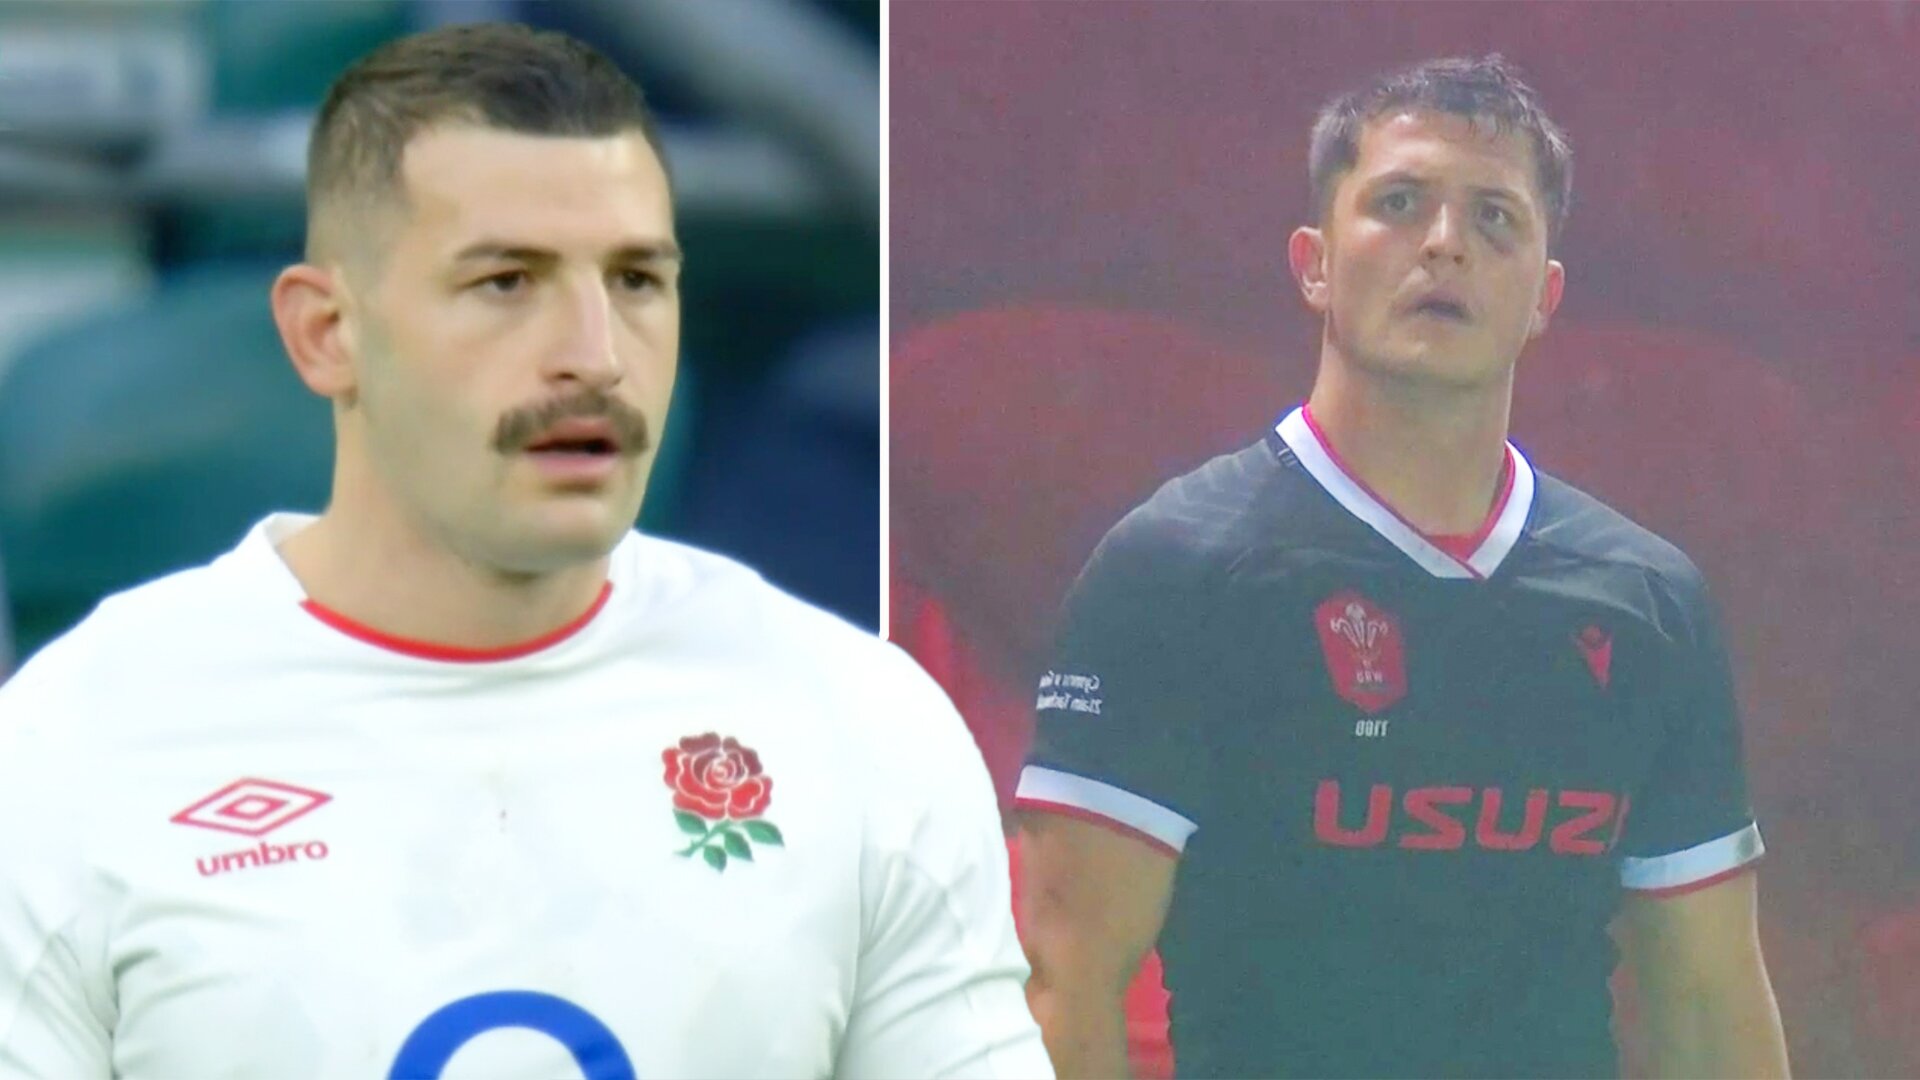 'It's going to be a massacre' - fan rivalry hits fever pitch in lead up to Wales vs England